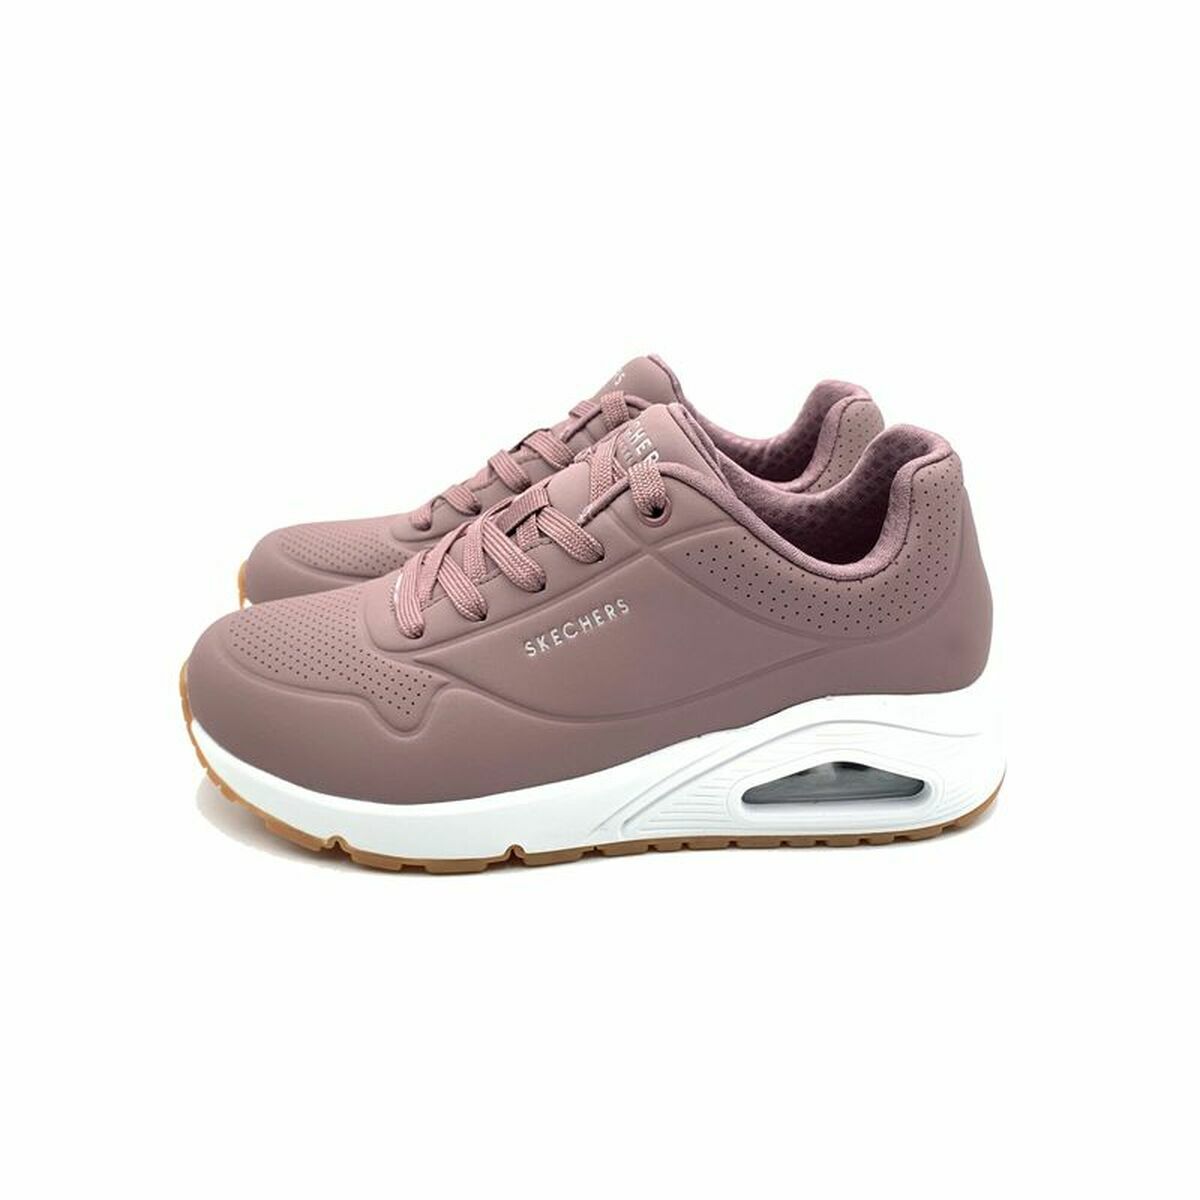 Chaussures de sport pour femme Skechers One Stand on Air Lila